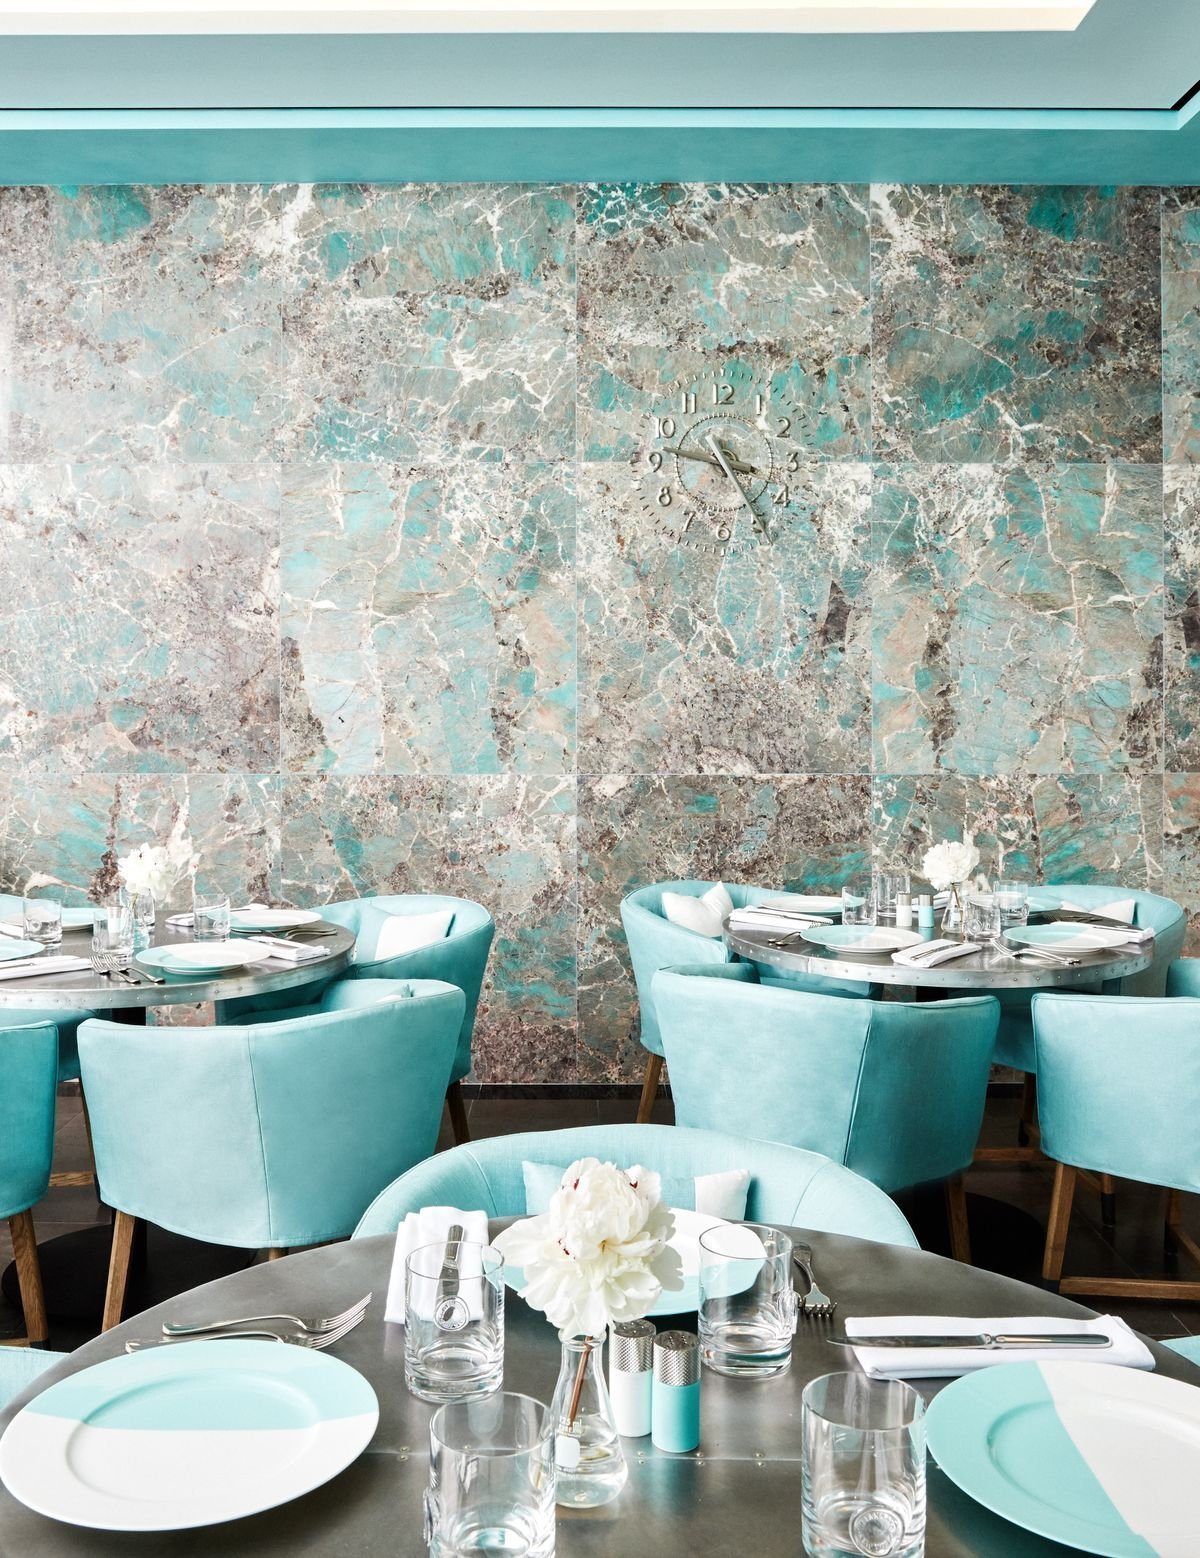 Ready for Breakfast at Tiffany’s? How to Get a Reservation at Blue Box ...